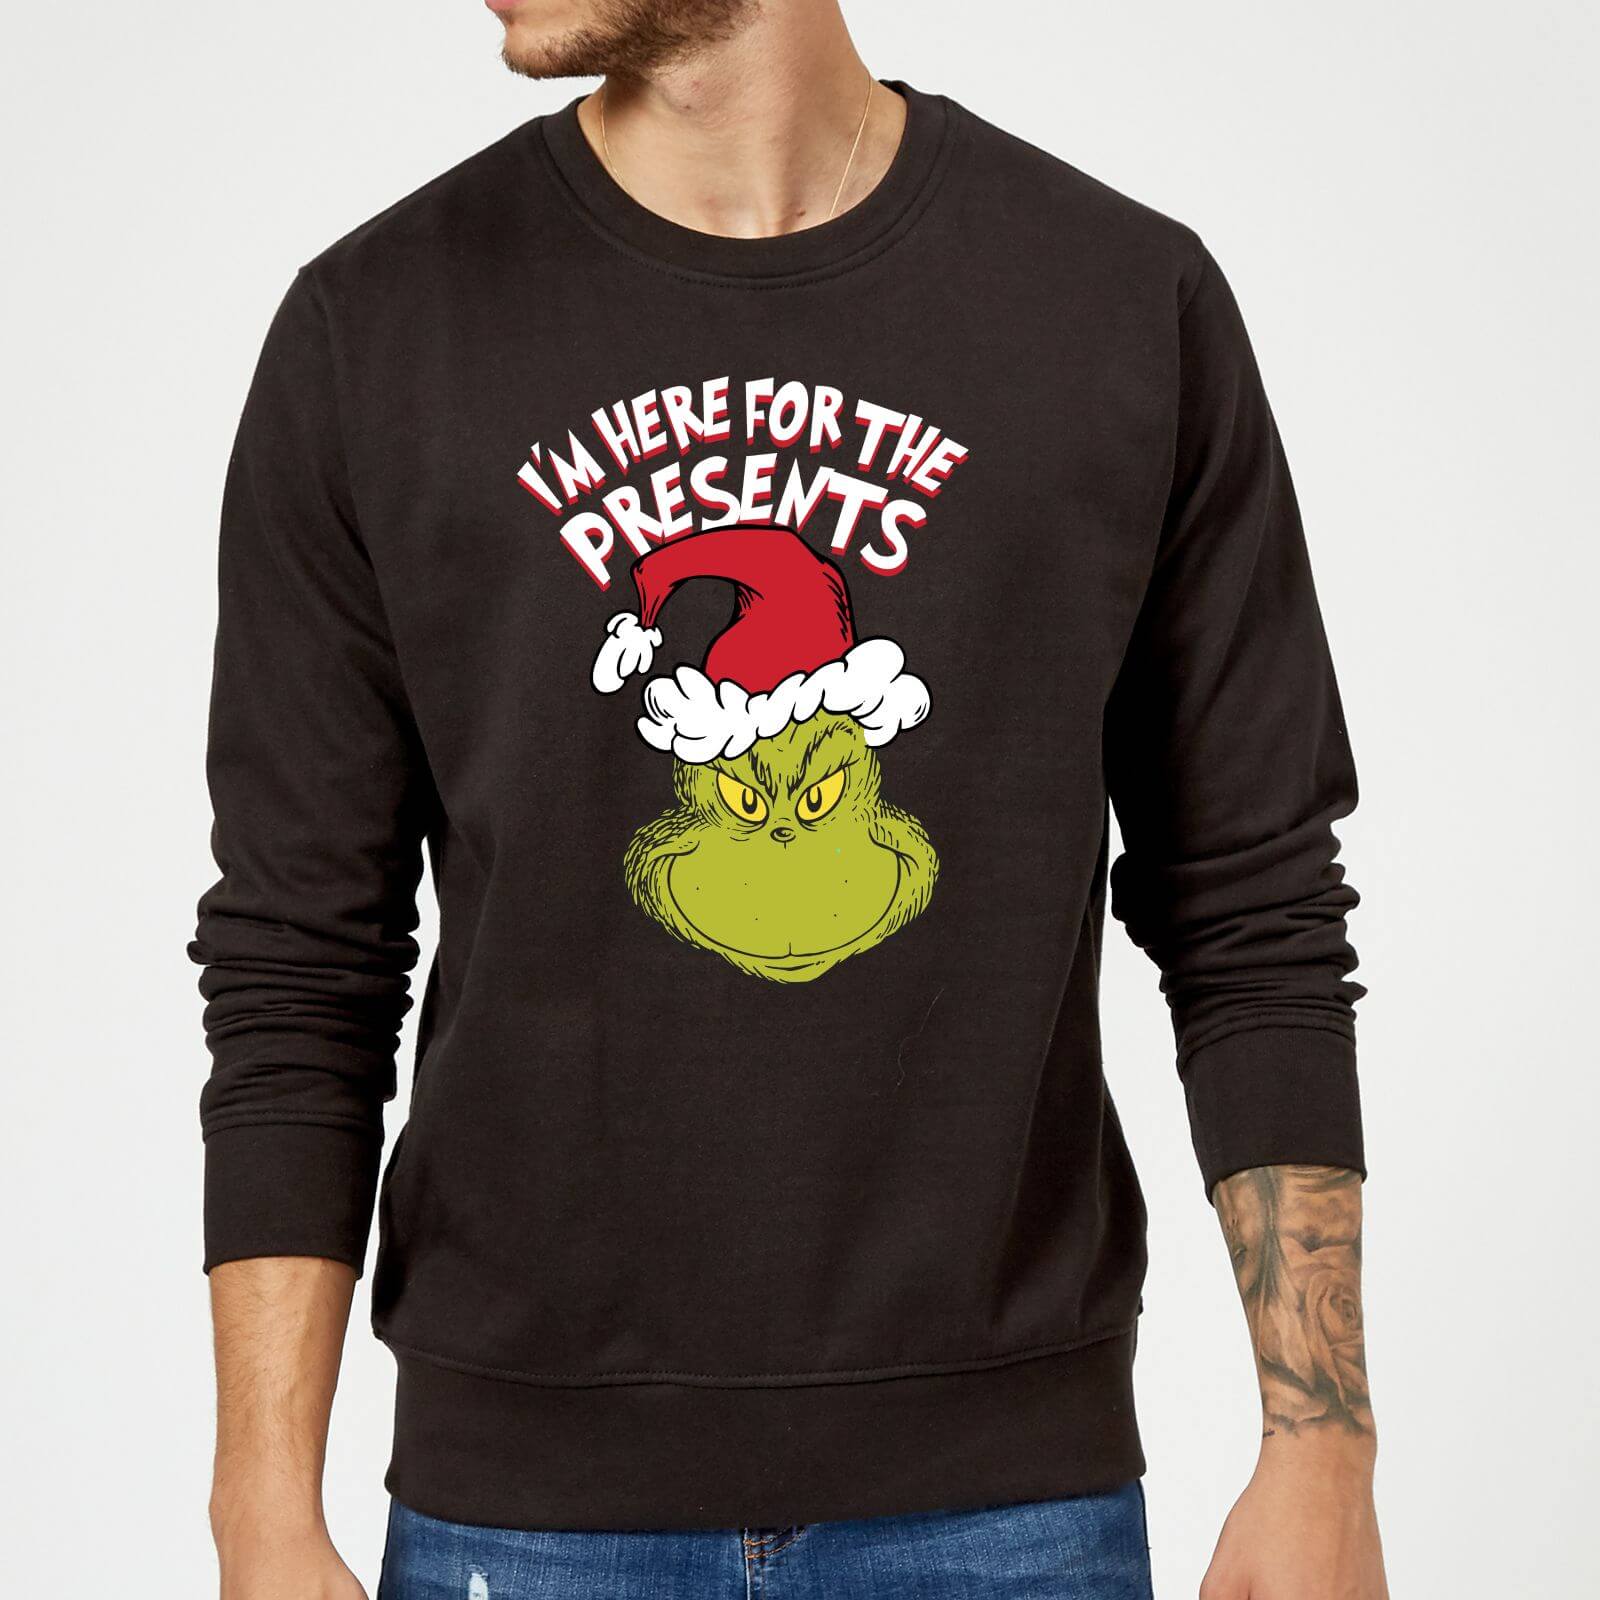 The Grinch Im Here for The Presents Christmas Sweatshirt - Black - XXL